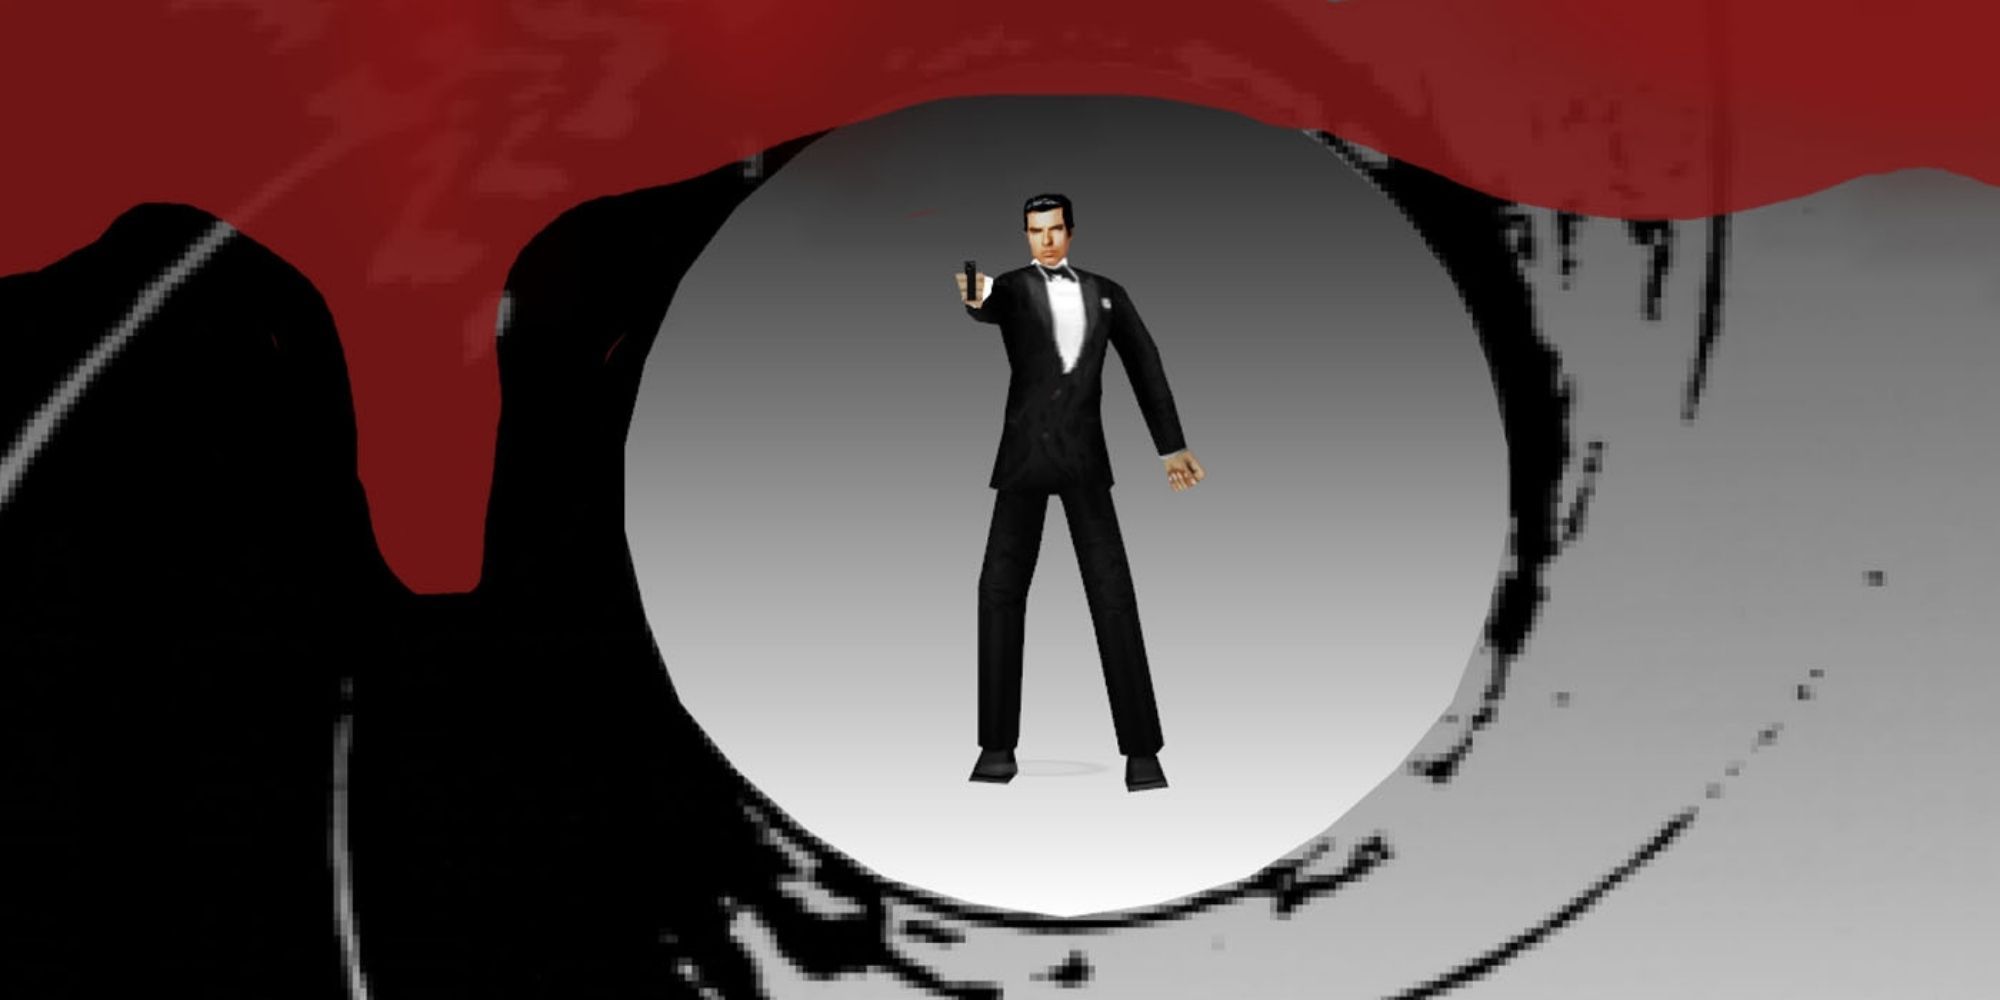 goldeneye opening sequence with bond in barrel